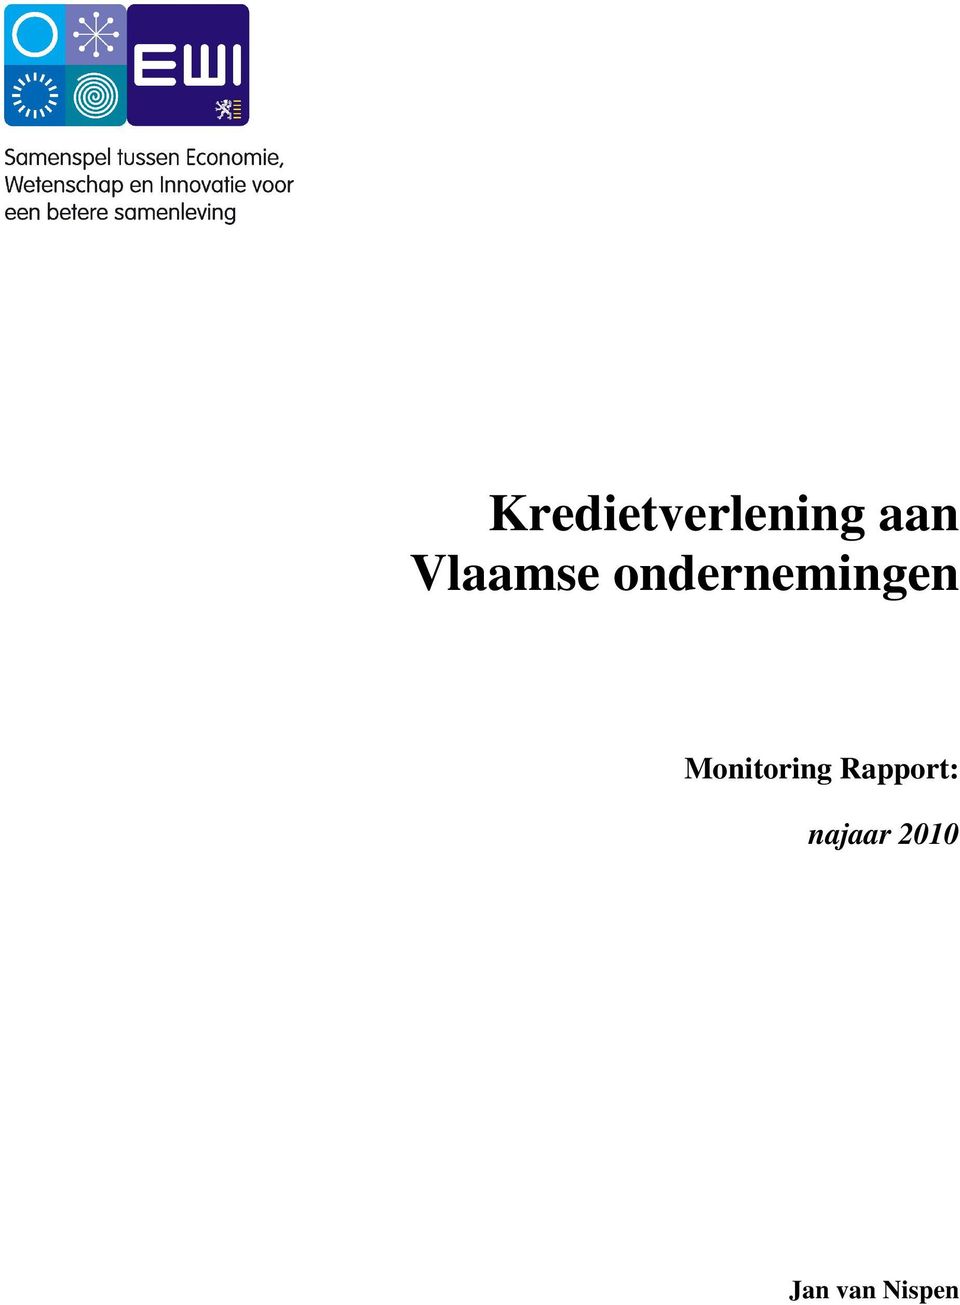 Monitoring Rapport: